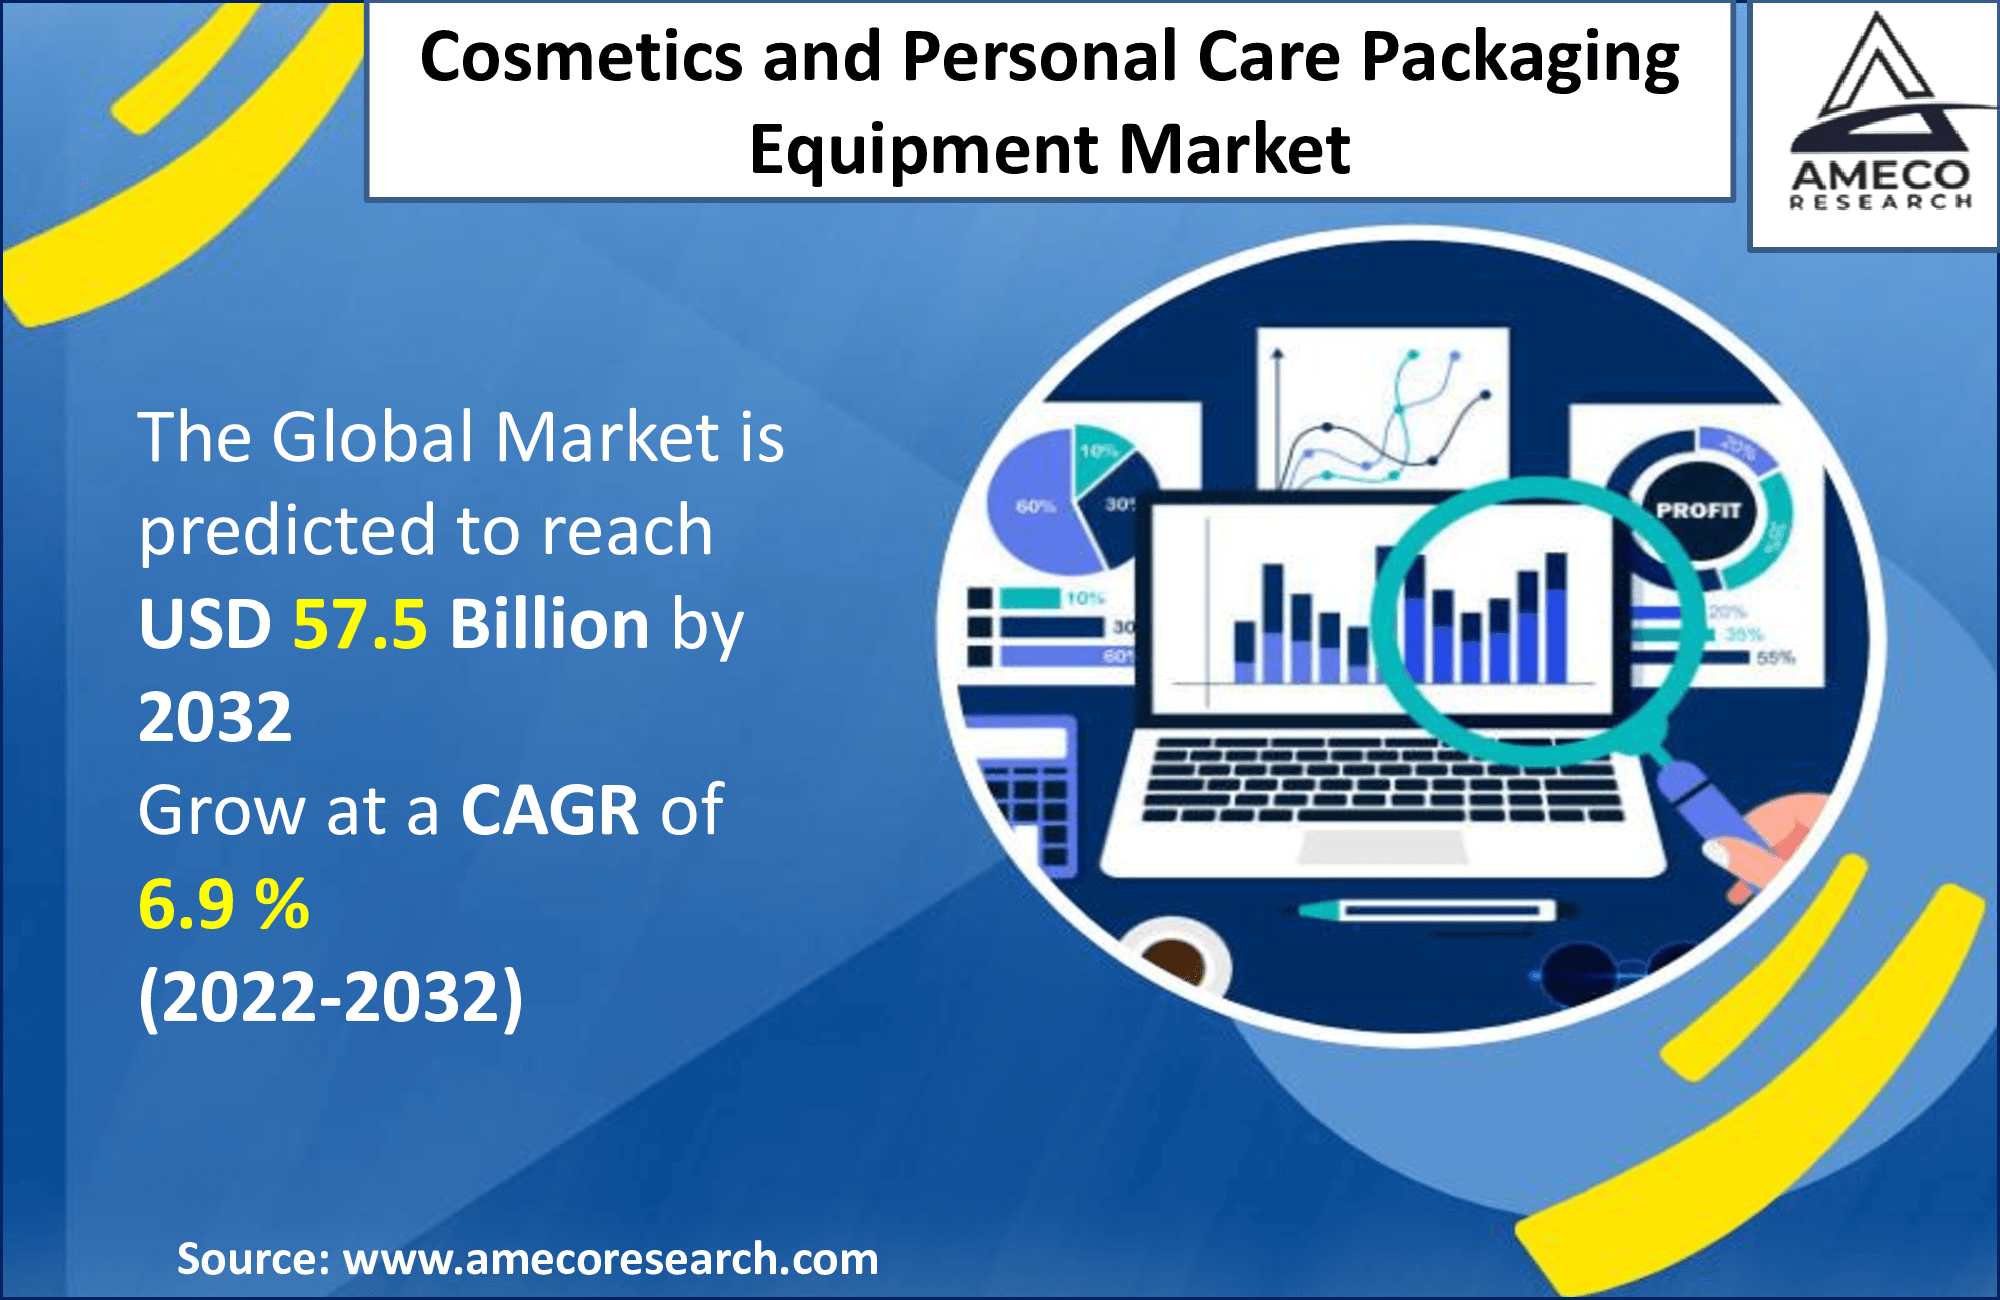 Cosmetics and Personal Care Packaging Equipment Market